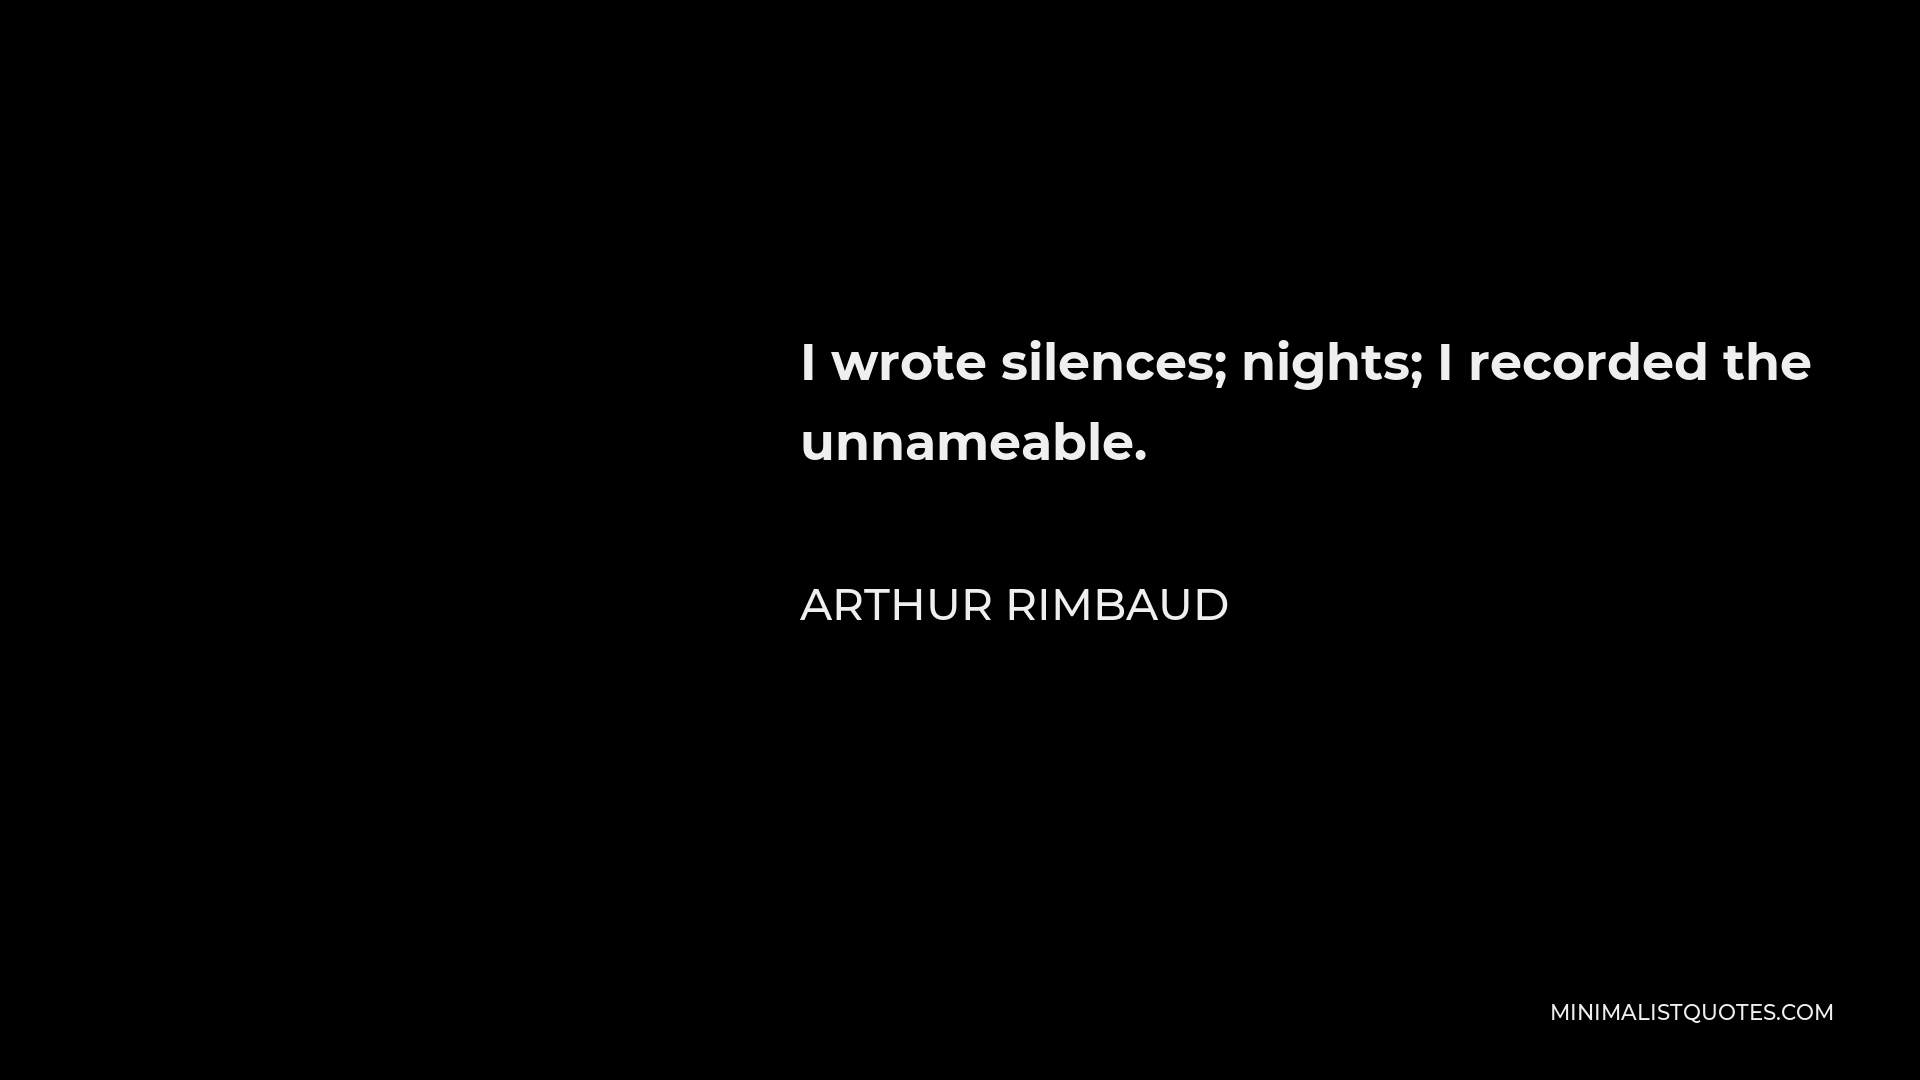 Arthur Rimbaud Quote - I wrote silences; nights; I recorded the unnameable.